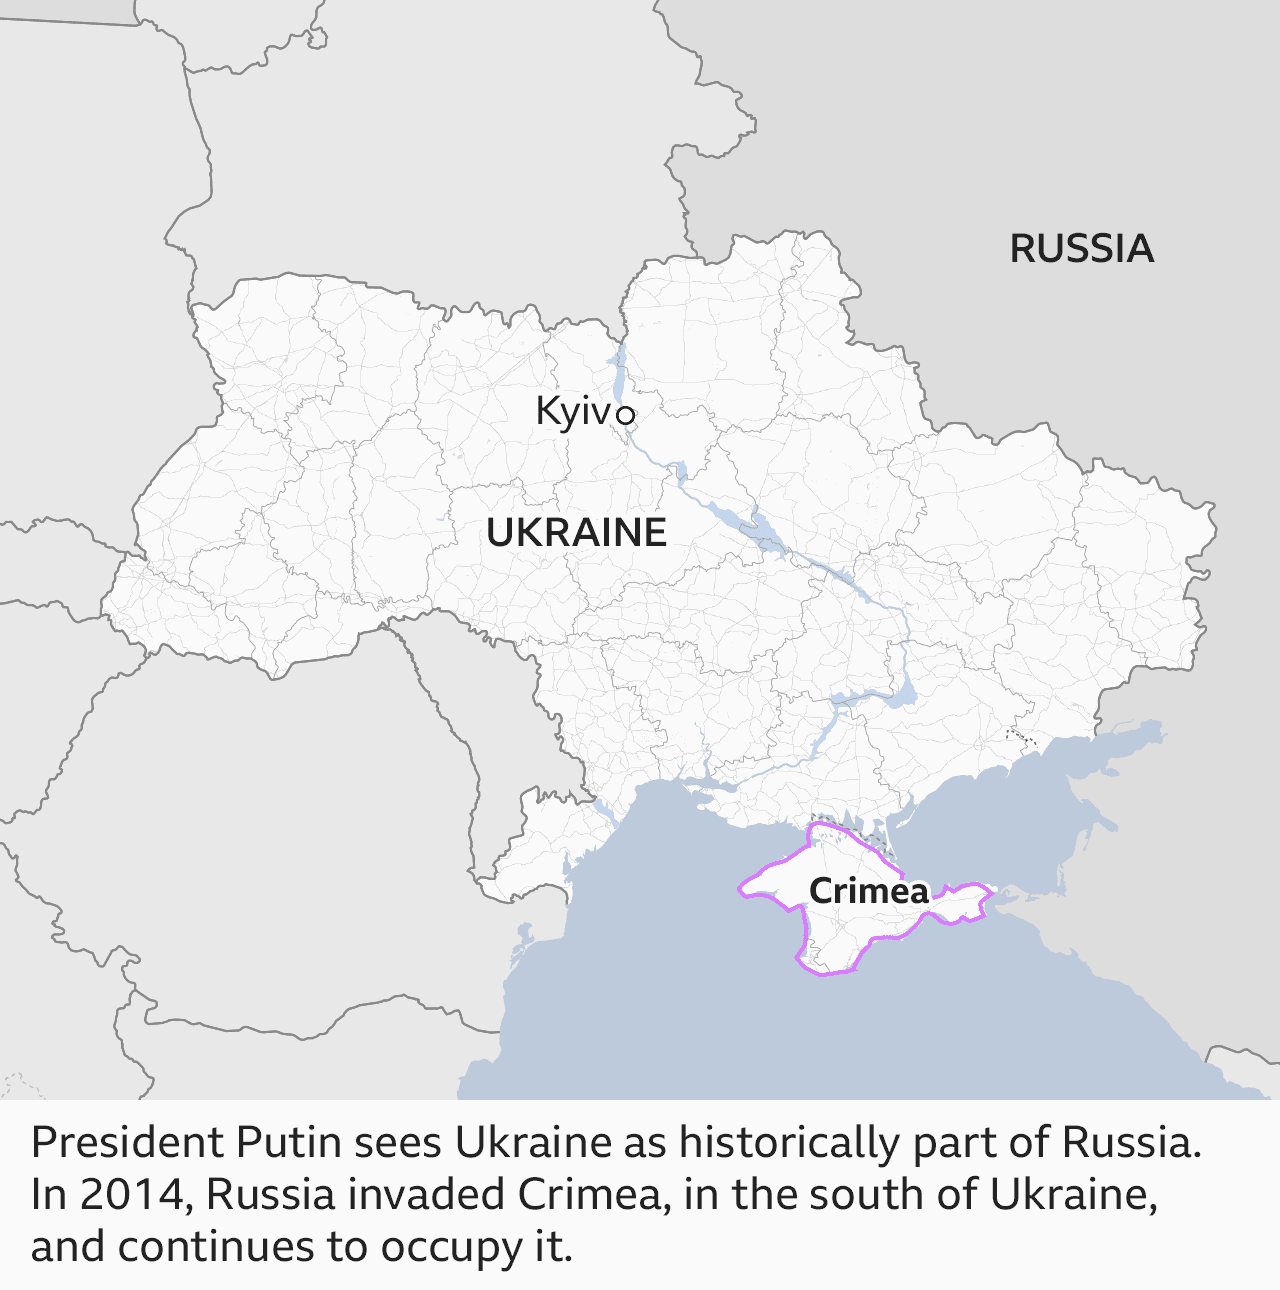 President Putin sees Ukraine as historically part of Russia. In 2014, Russia invaded Crimea, in the south of Ukraine, and continues to occupy it.